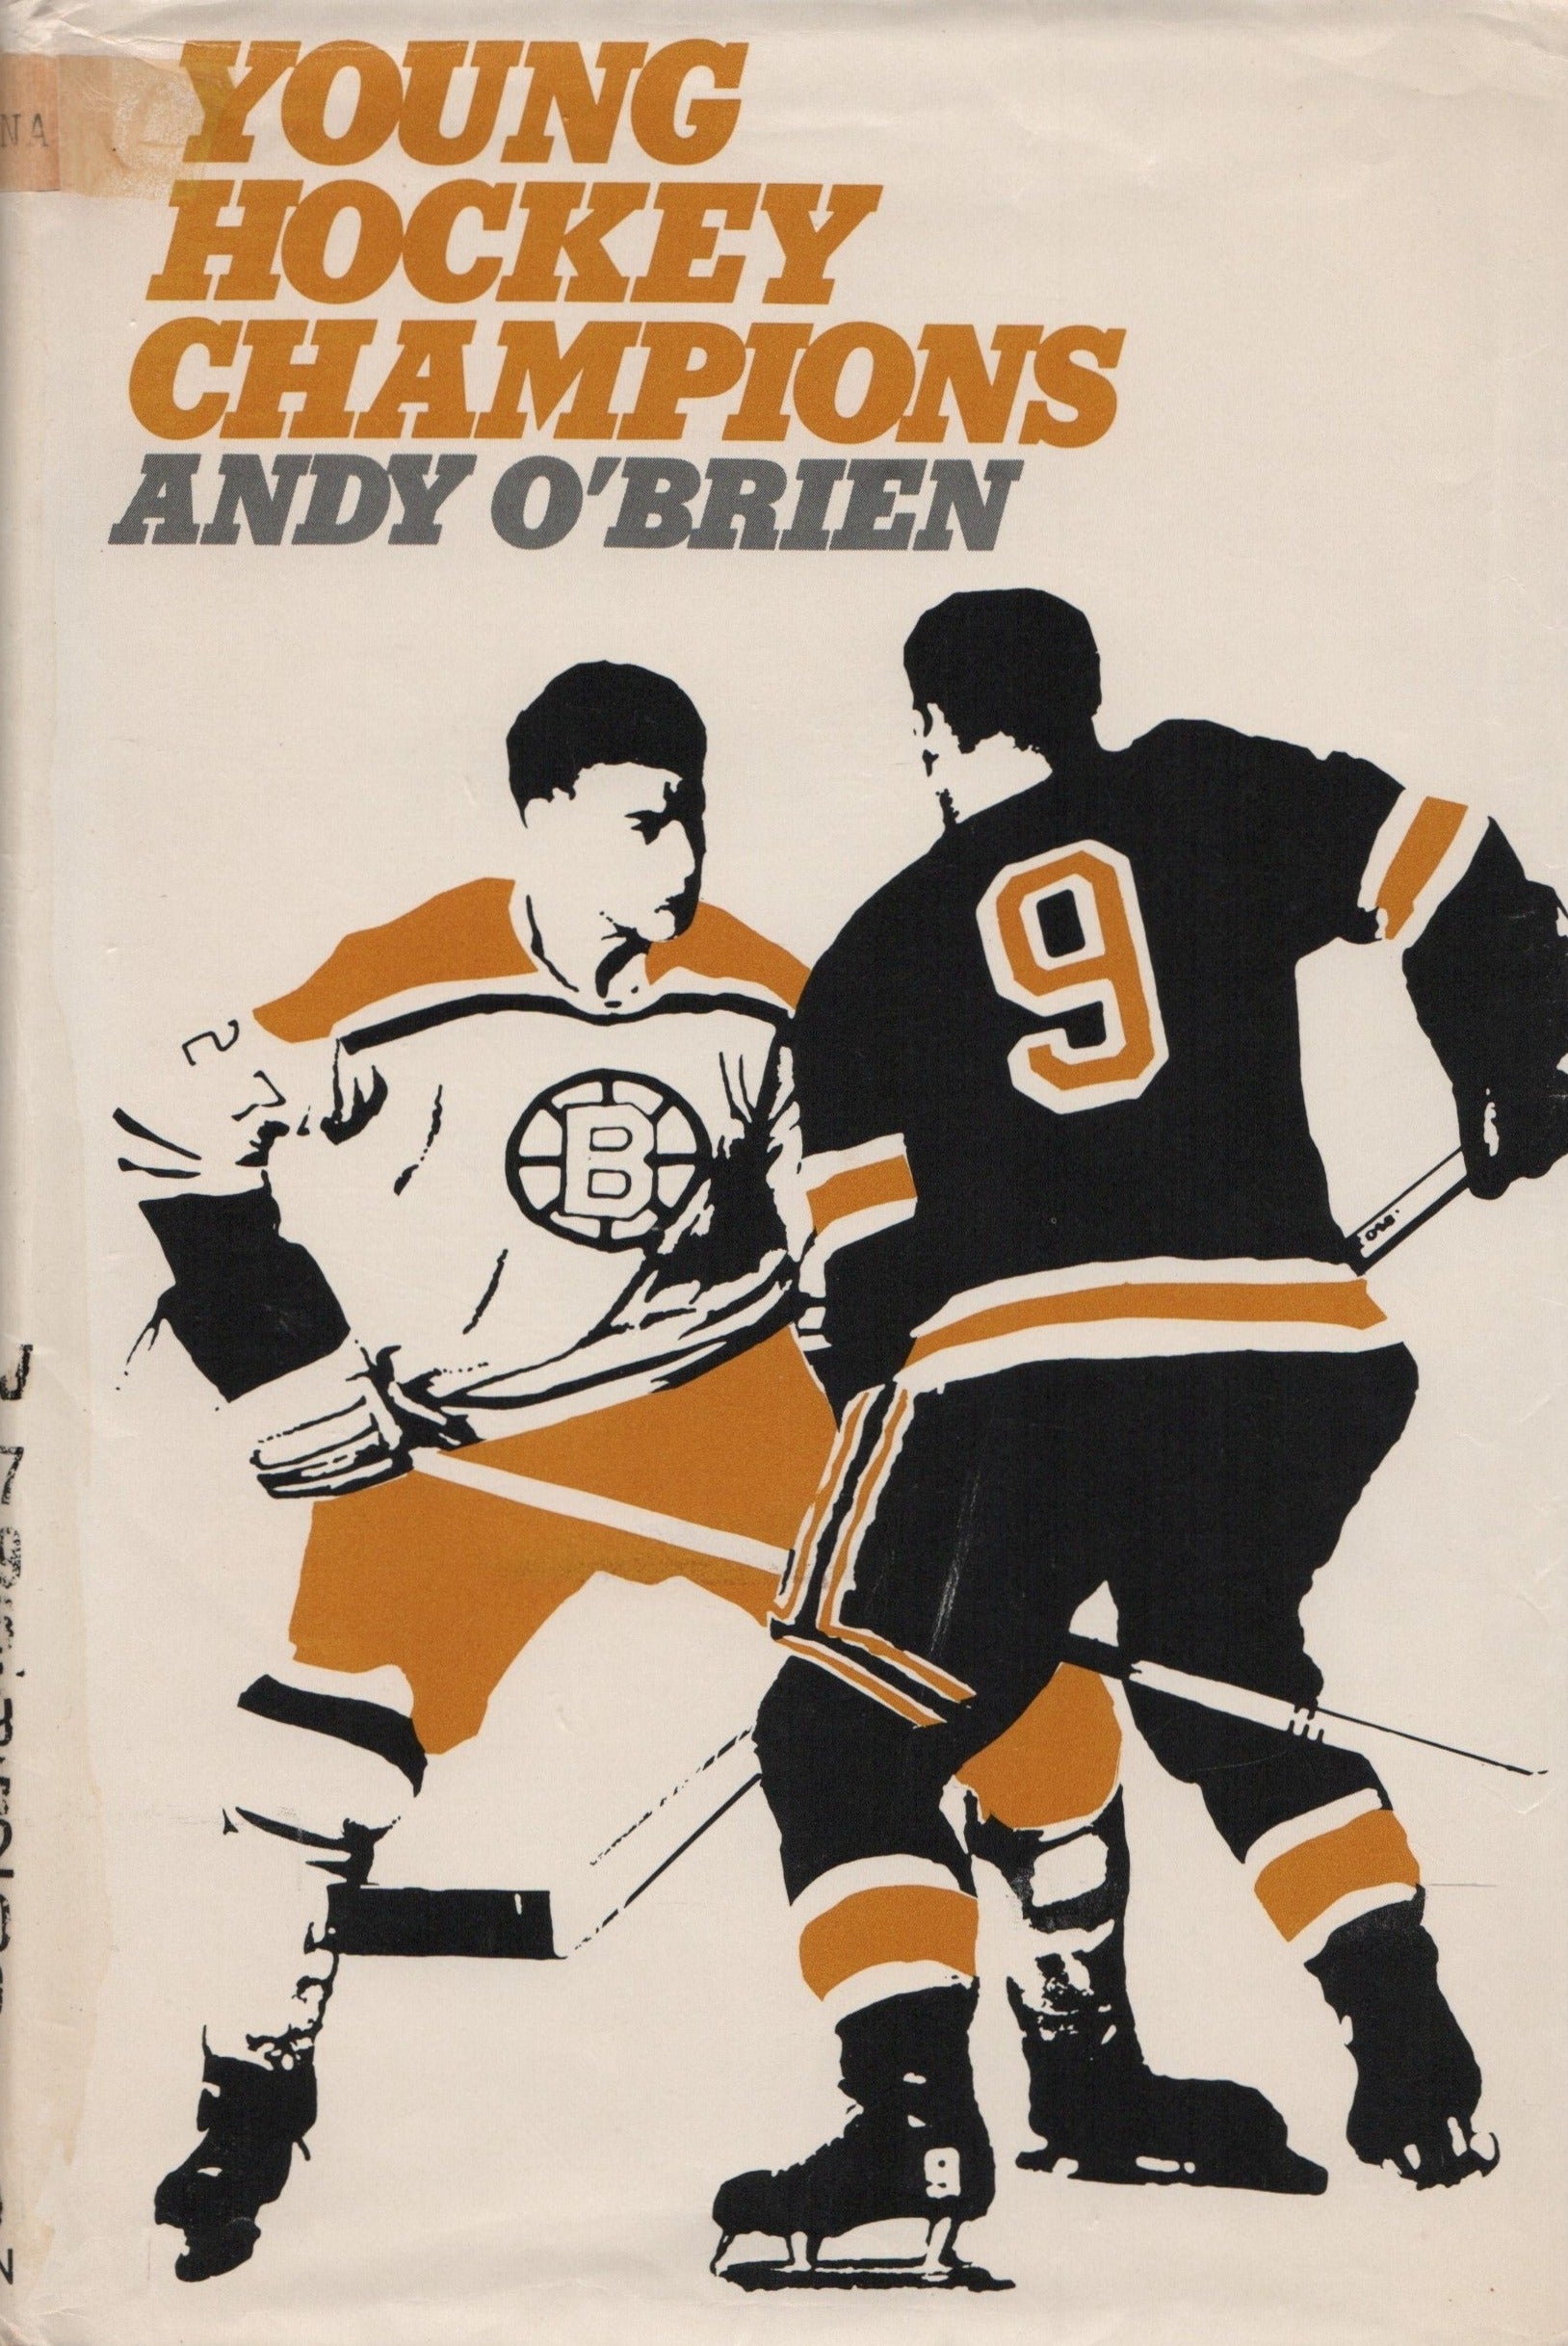 O'BRIEN, ANDY. Young Hockey Champions